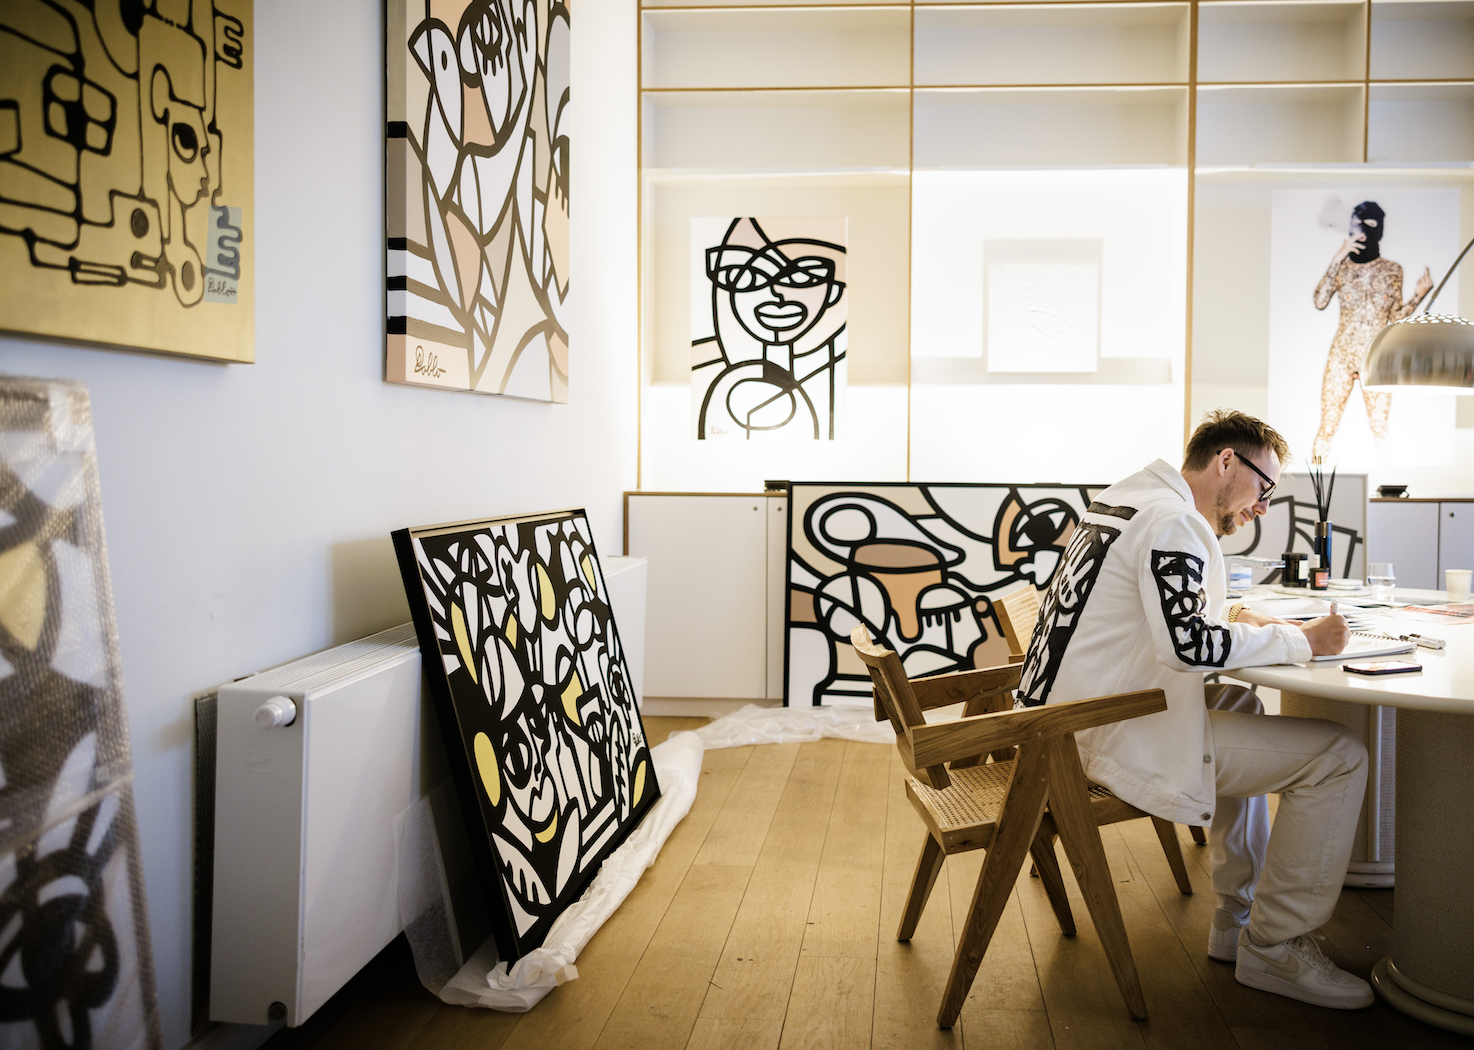 pablo lucker&#x27;s gallery with a number of prints displayed and pablo working at his desk